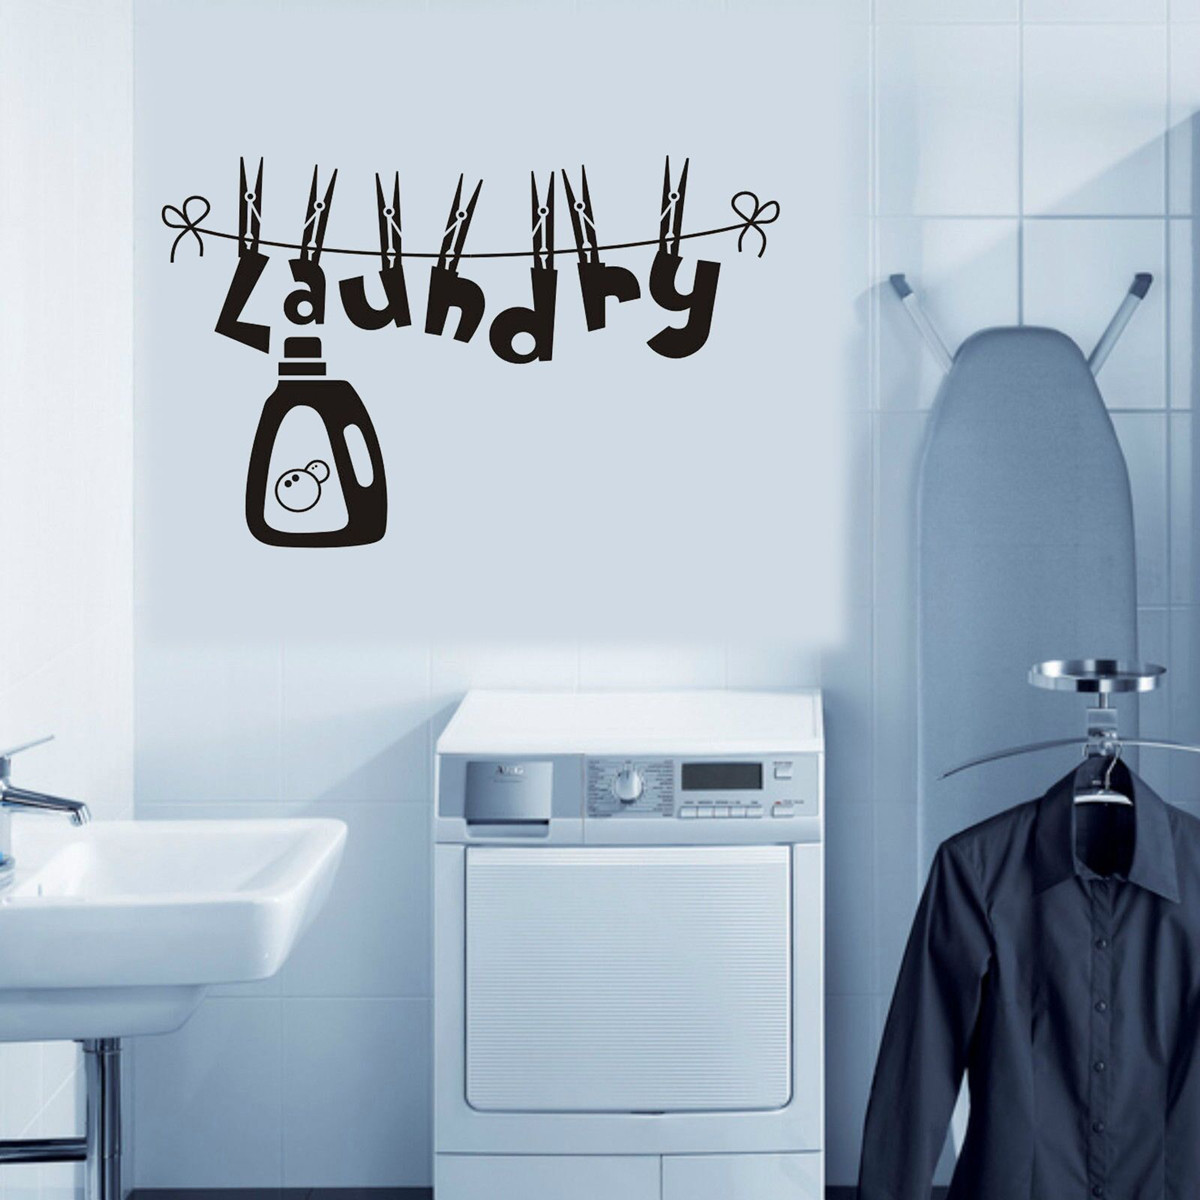 Laundry-Room-Wall-Sticker-PVC-Waterproof-Removable-Wall-Sticker-Painting-Home-Decor-1719040-4